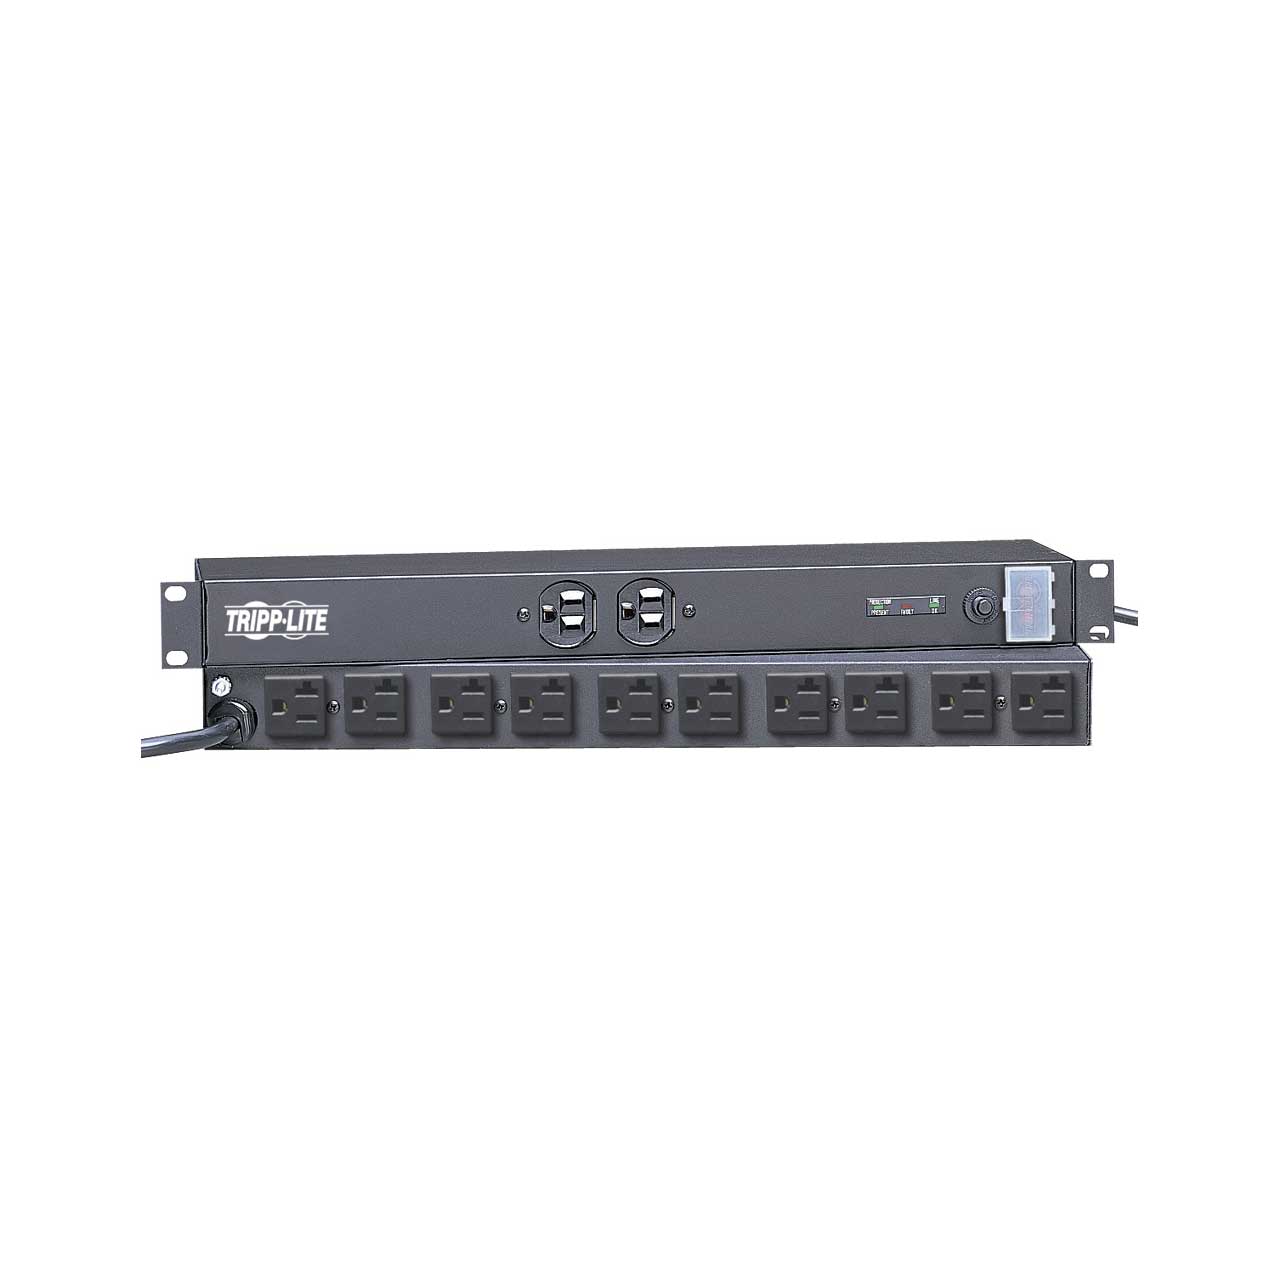 Tripp Lite Isobar Surge Protector Rackmount 20A 12 Outlet 15' Cord 1URM -  surge protector - IBAR12-20T - Power Strips & Surge Protectors 